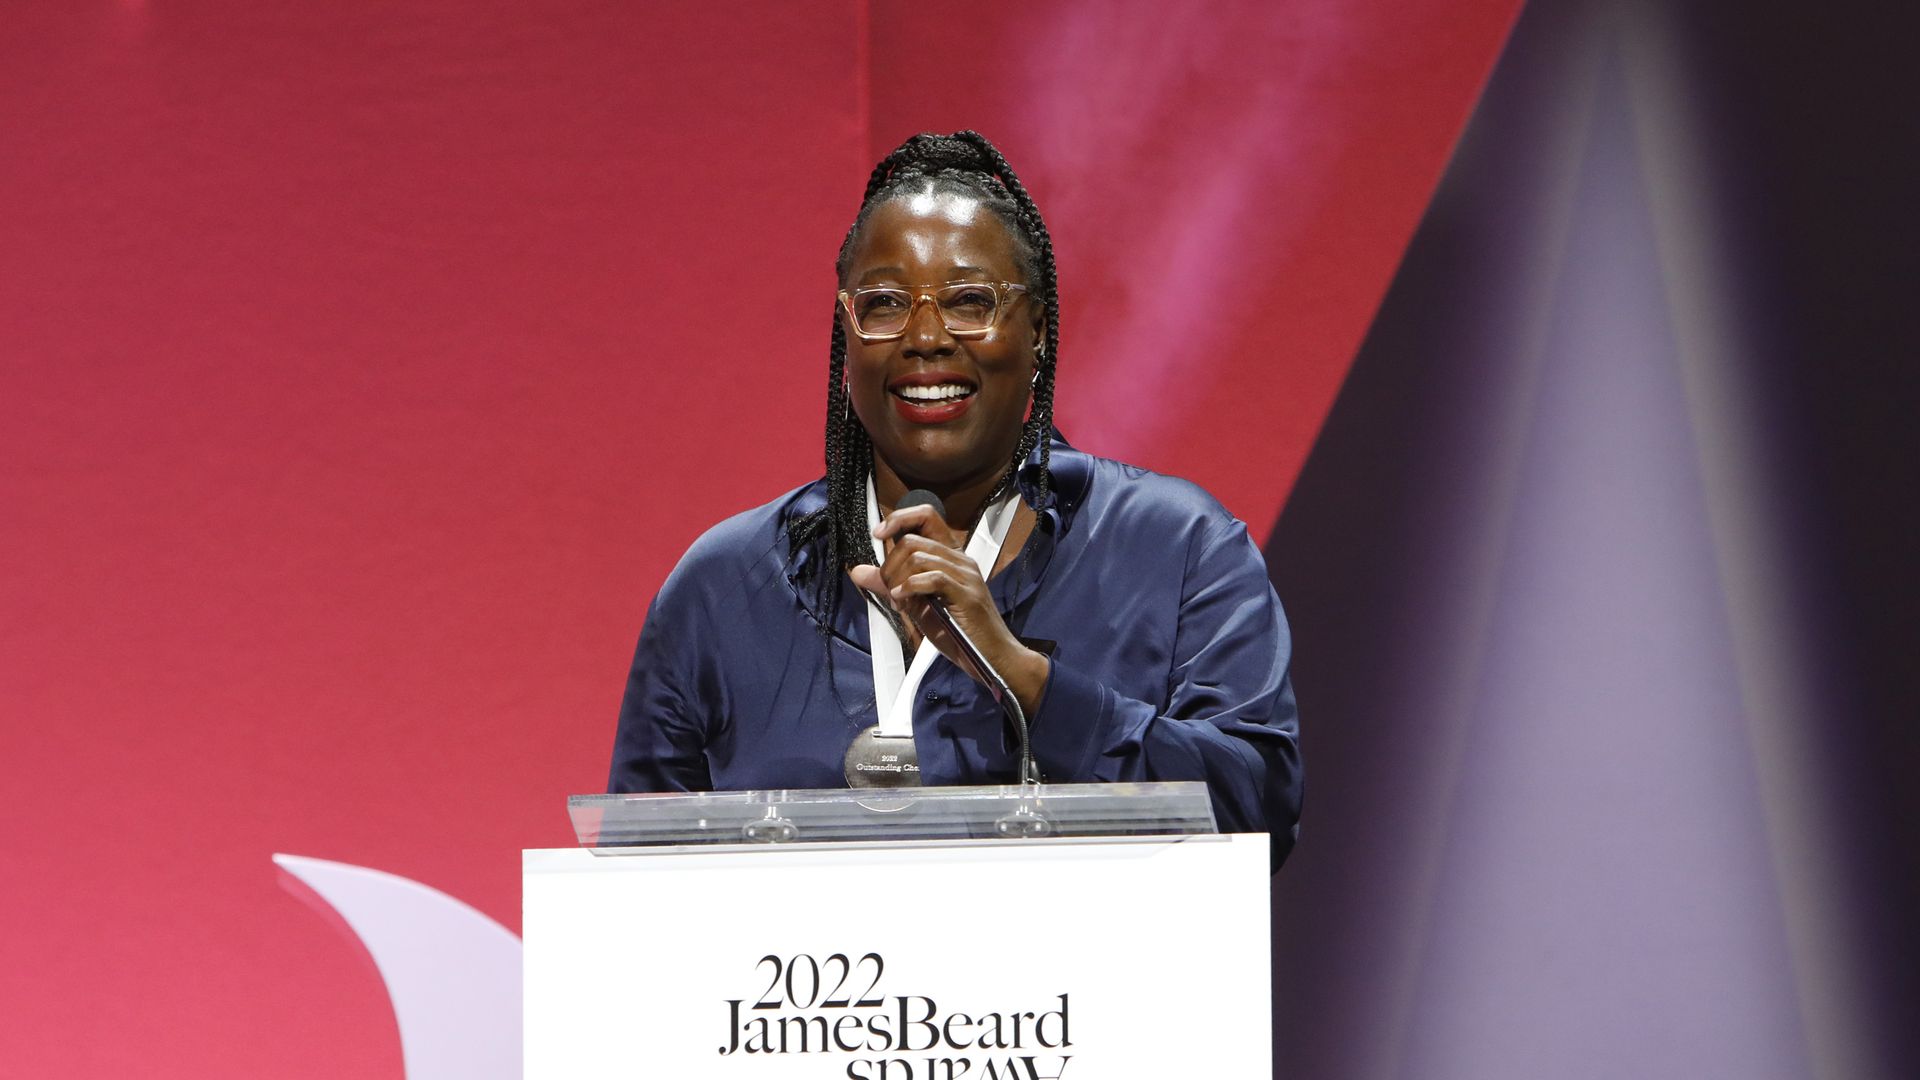 A Black woman with glasses and red lipstick smiles as she stands behind a podium speaking 